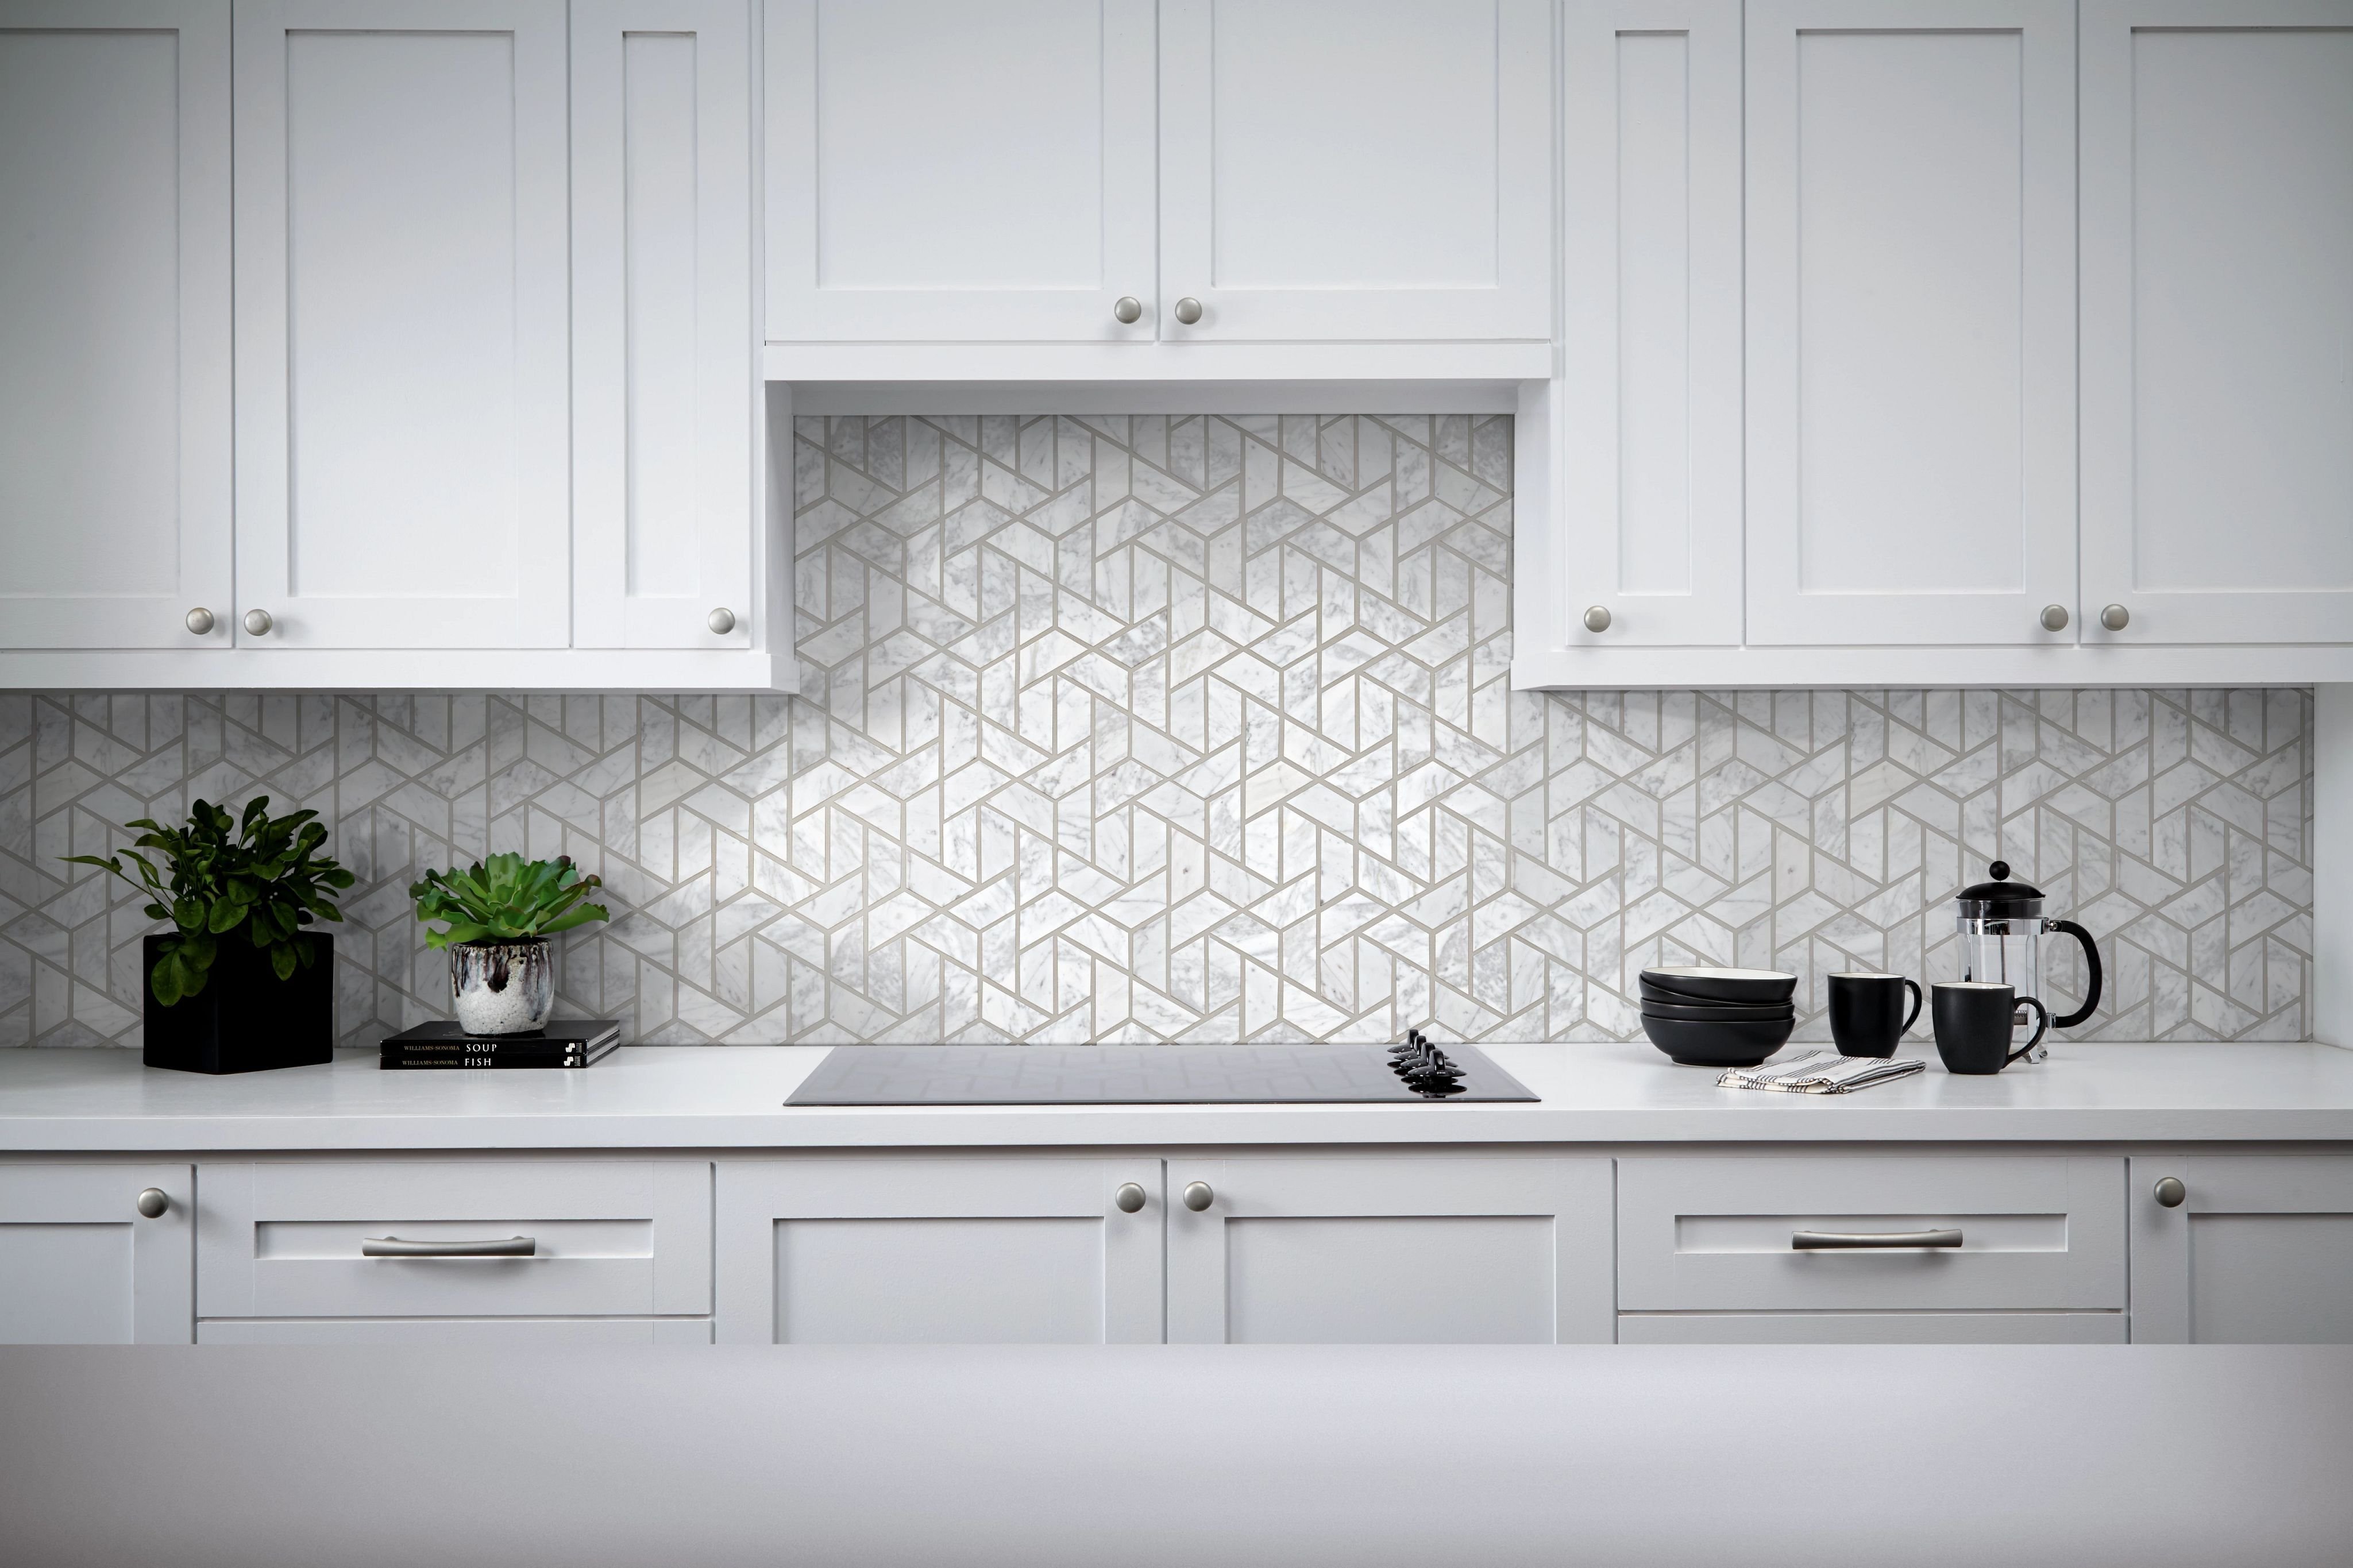 Tile Backsplash from Zinz Design and Selection Center Inc in Austintown, OH